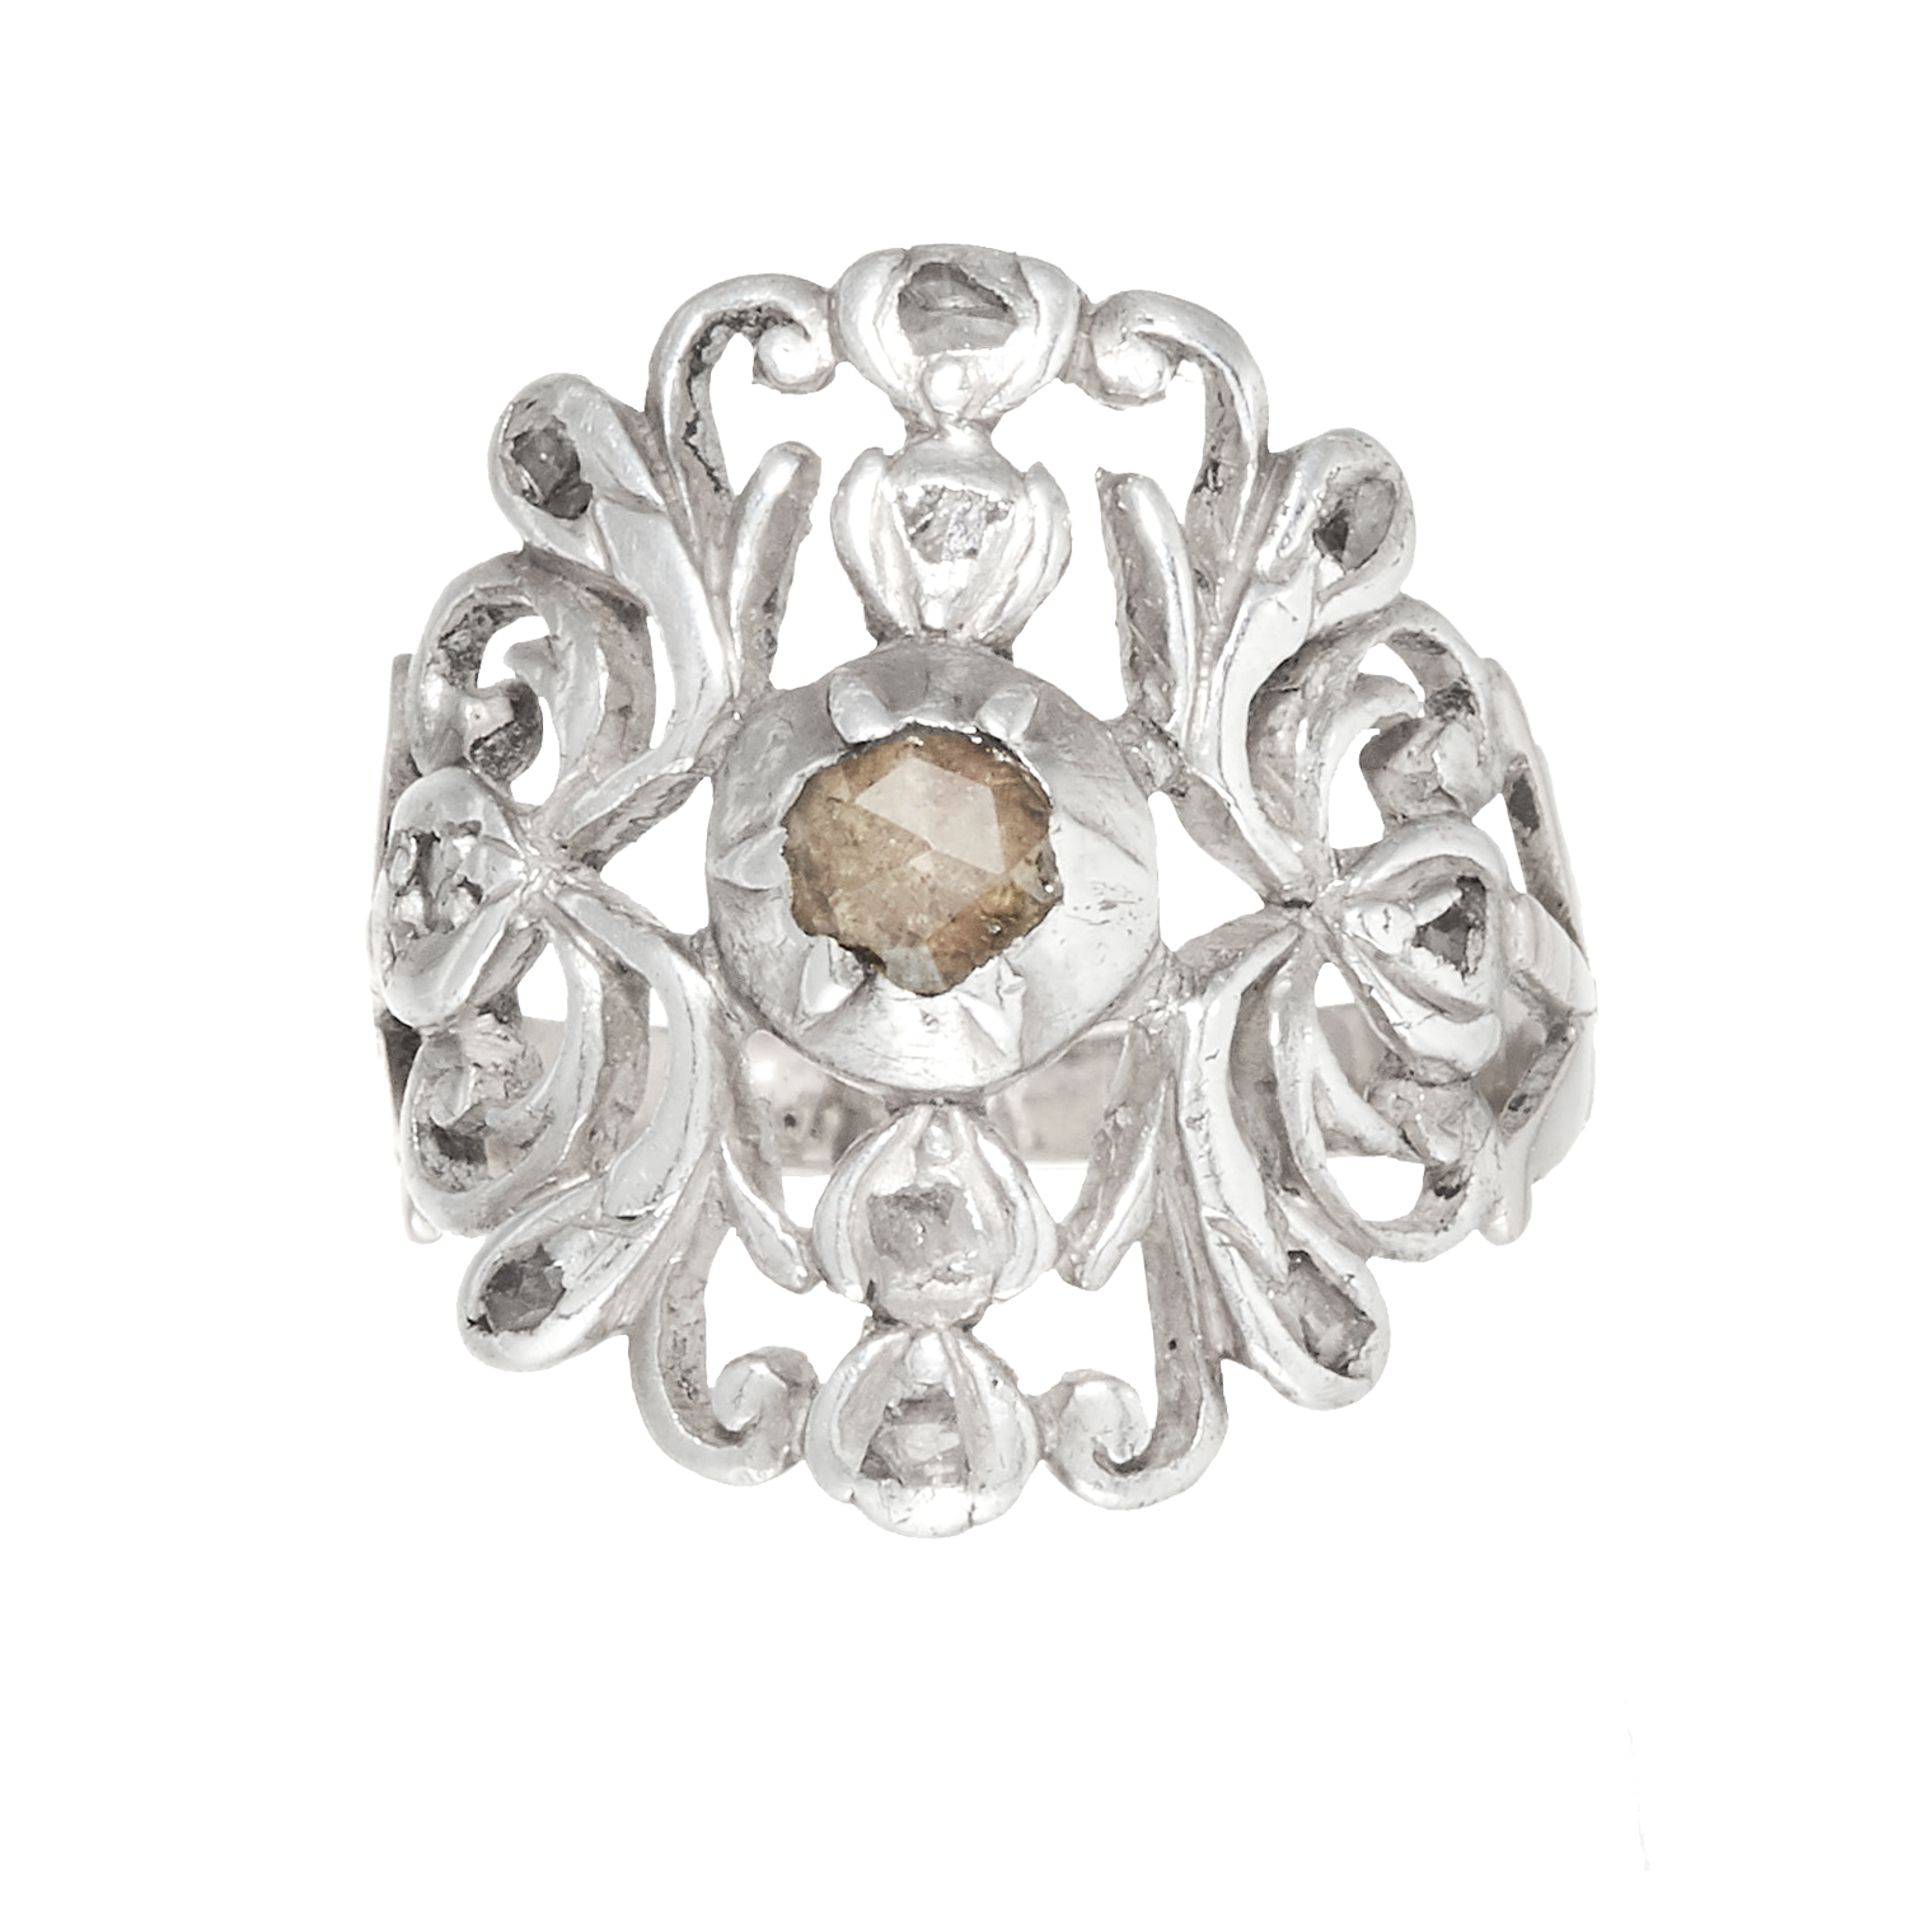 A DIAMOND DRESS RING, DUTCH / SPANISH, EARLY 19TH CENTURY, in yellow gold and silver, set with a